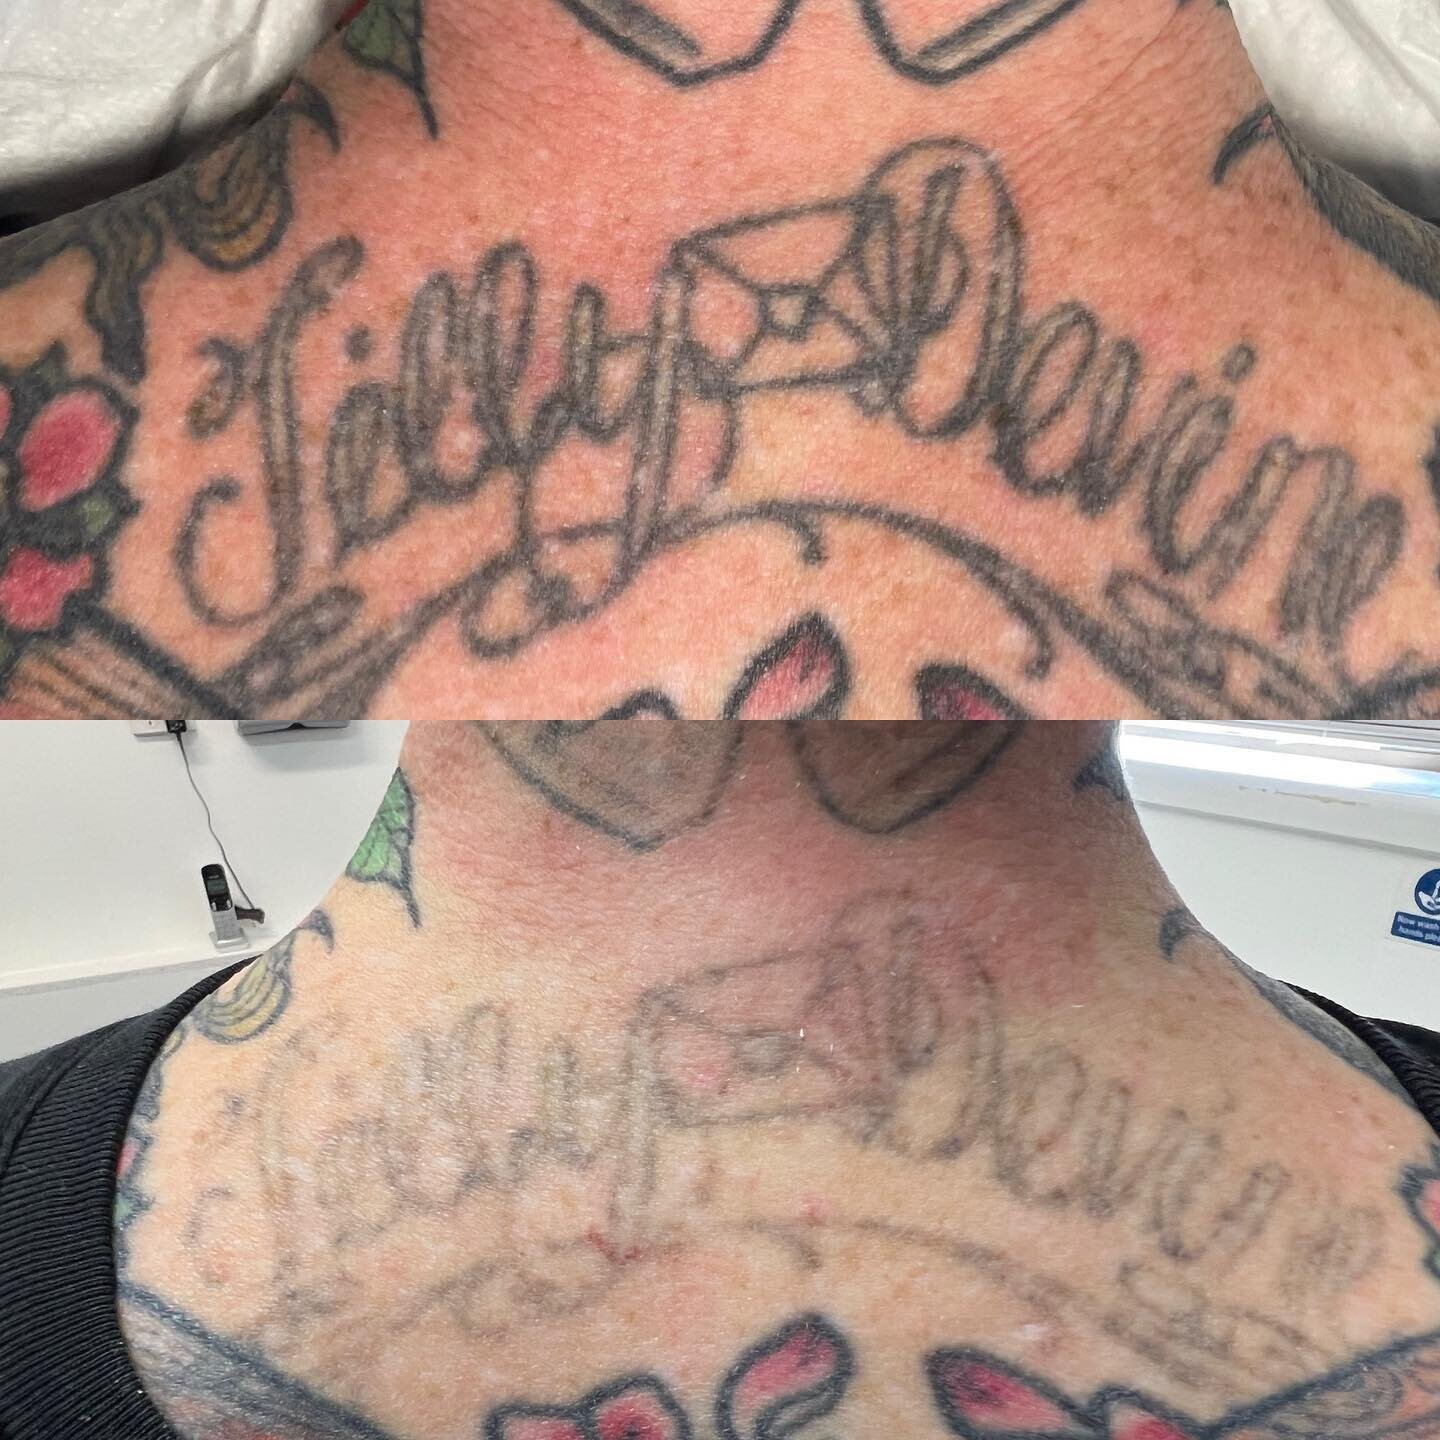 .
This tattoo required one (1) laser tattoo removal session using FracTaT technology to lighten to this effect.
.
.
.
.
⛩ @lazerandco_ 
📞 07 5493 6948
📫 hello@lazerandco.com.au
🌐 www.lazerandco.com.au
#tattooremoval  #tattoolightening #tattooremov